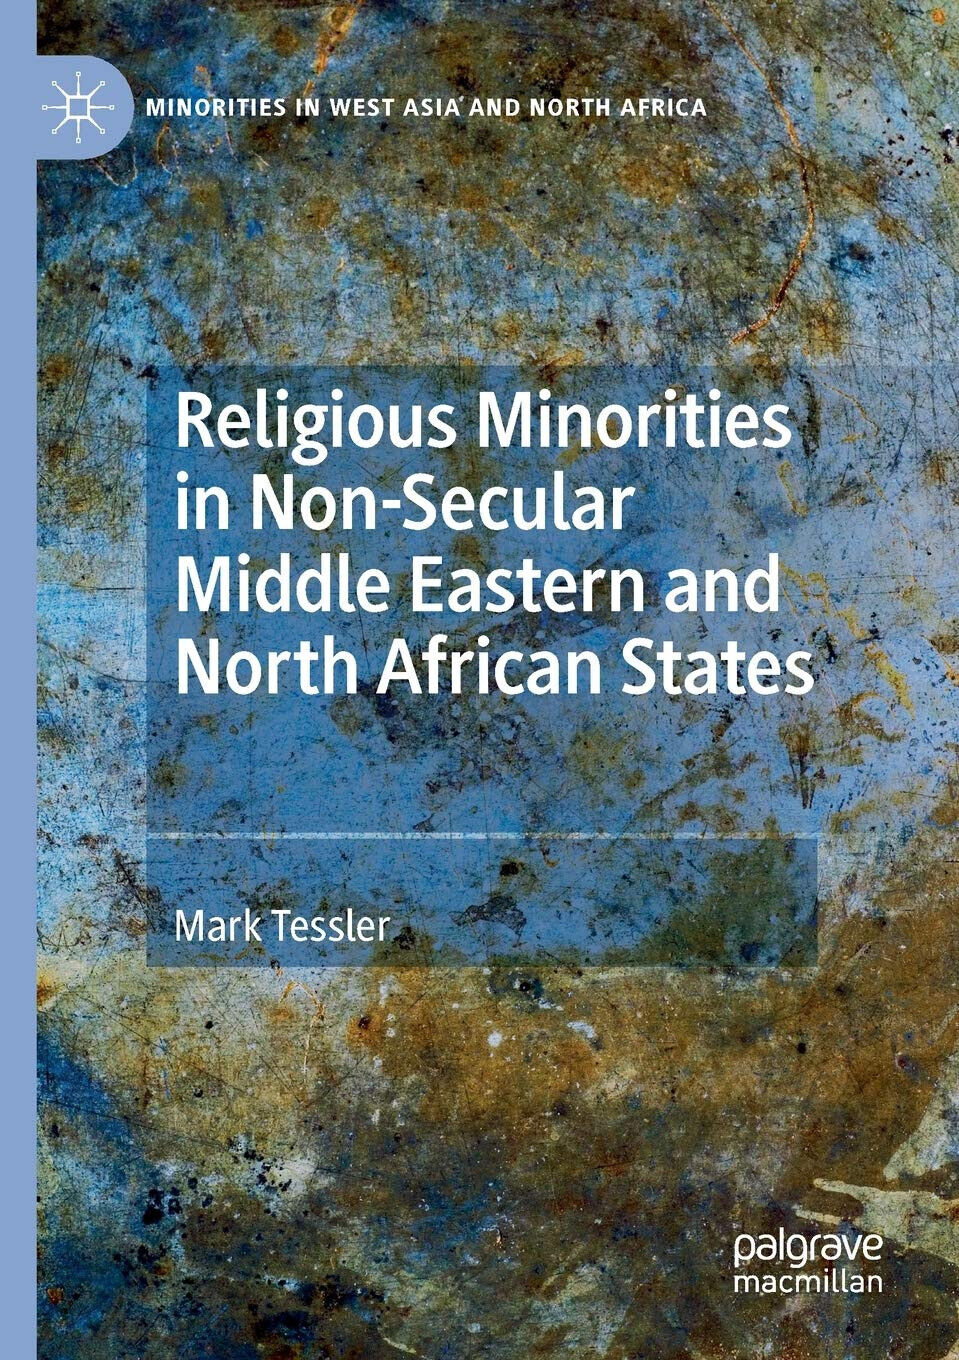 Religious Minorities in Non-Secular Middle Eastern and North African States-2020